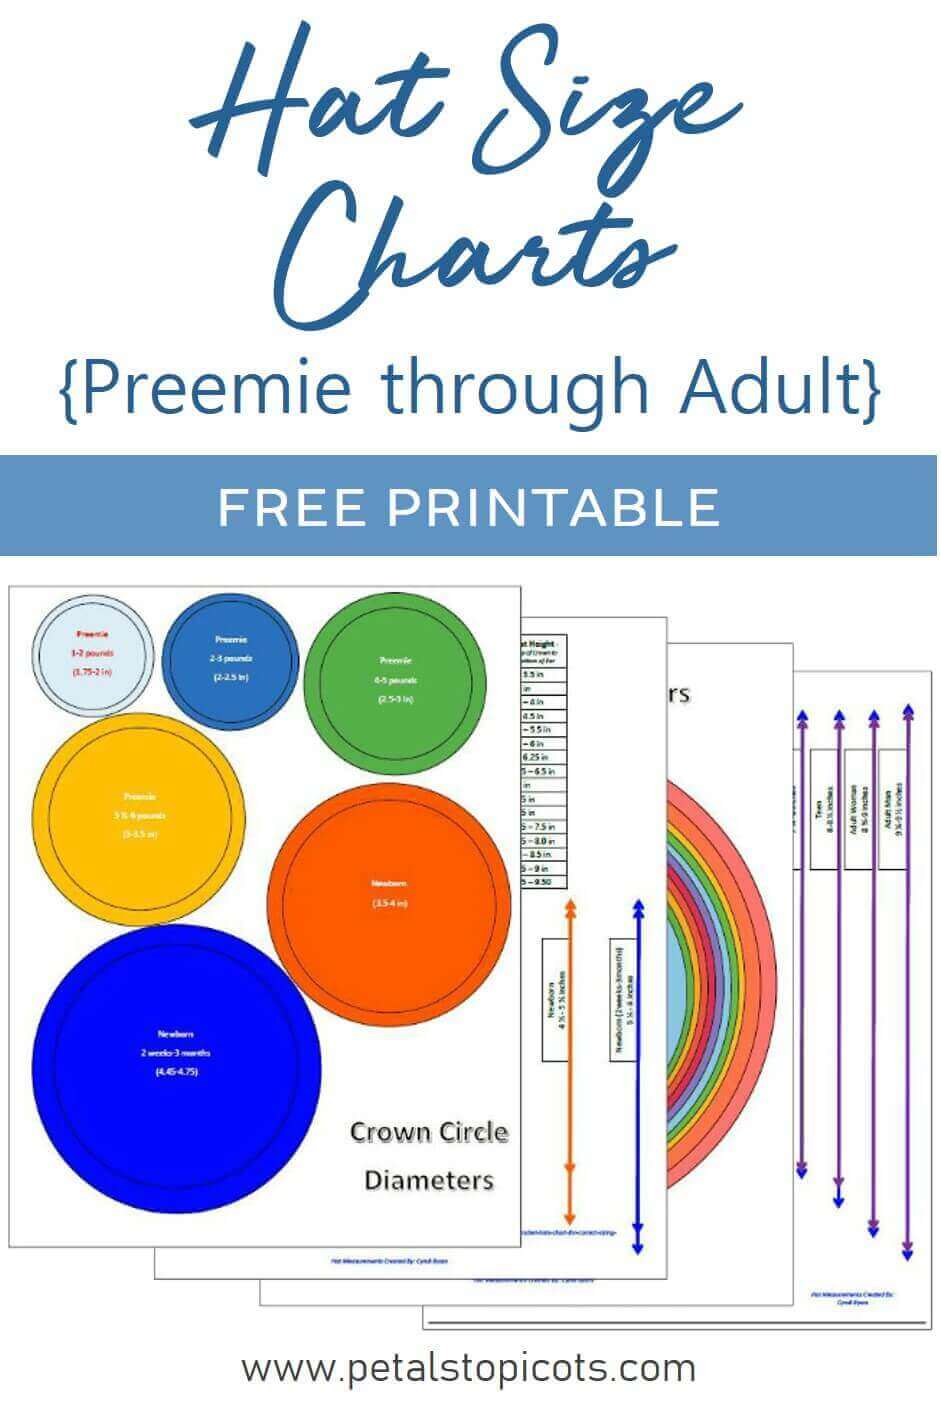 Hat Size Chart for Preemie through Adult {Free Printable}